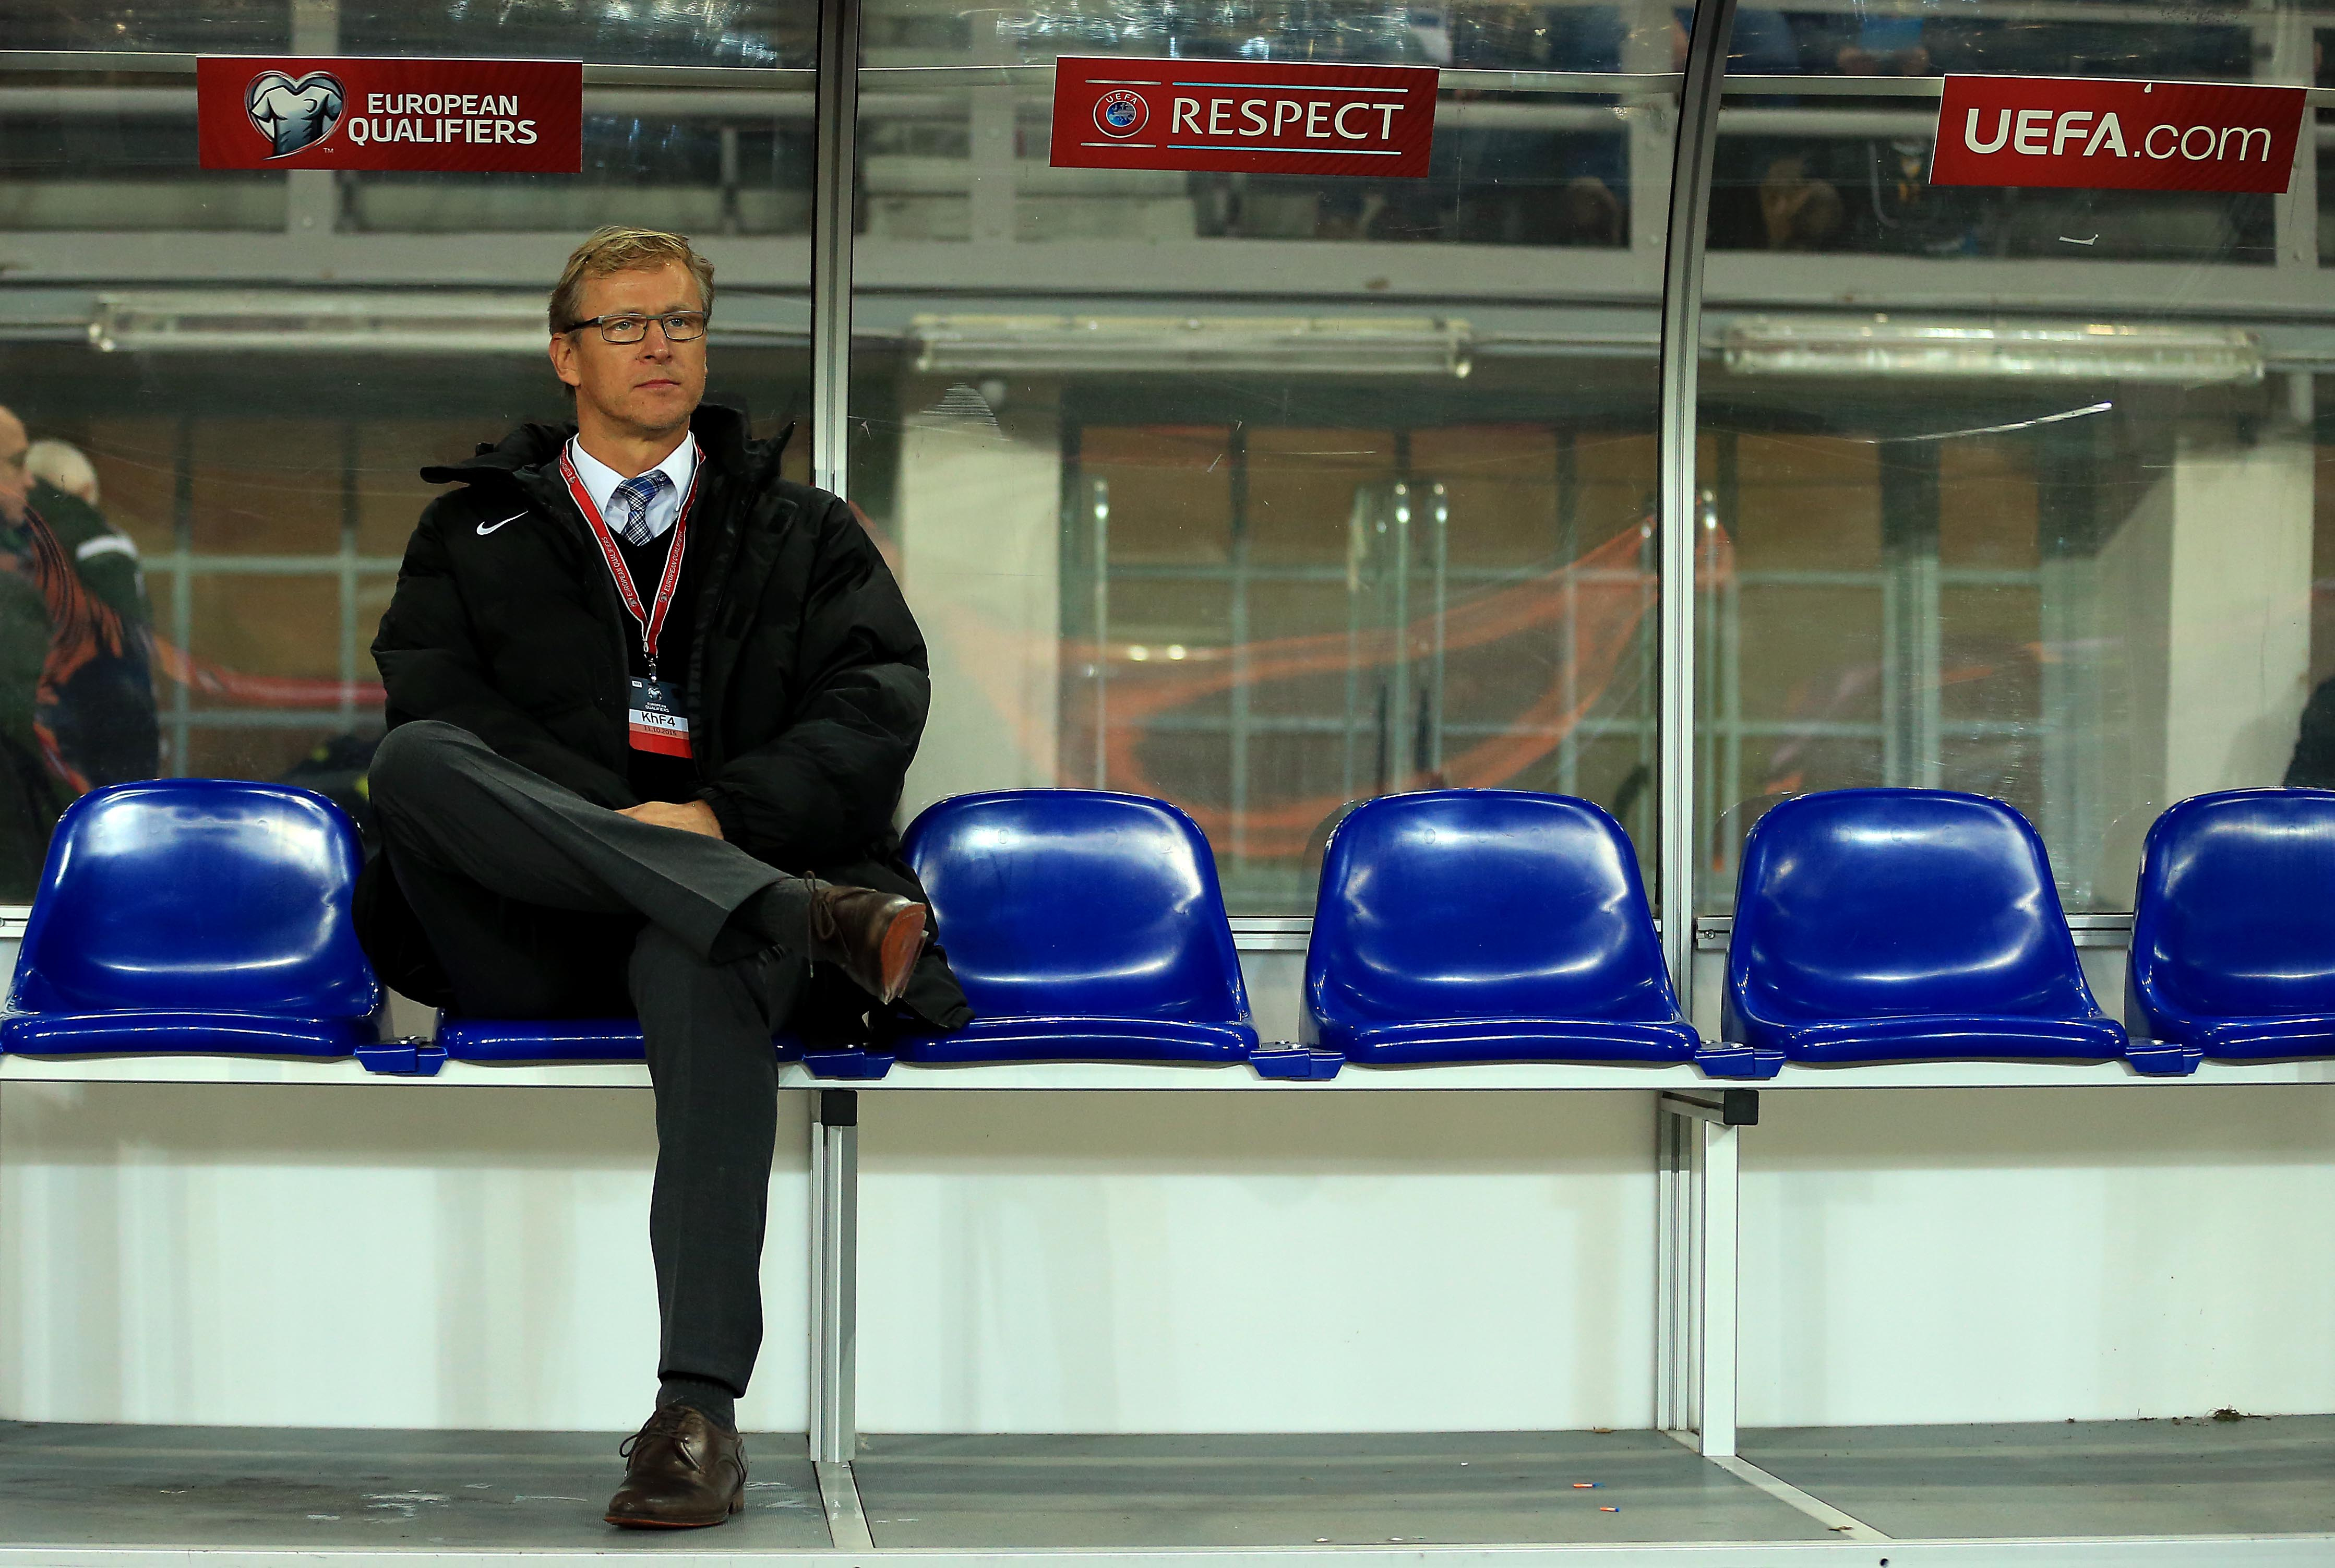 HELSINKI, FINLAND - OCTOBER 11:  Finland Manager Markku Kanerva during the UEFA EURO 2016 Qualifying match between Finland and Northern Ireland at the Olympic Stadium on October 11, 2015 in Helsinki, Finland. (Photo by Stephen Pond/Getty Images)